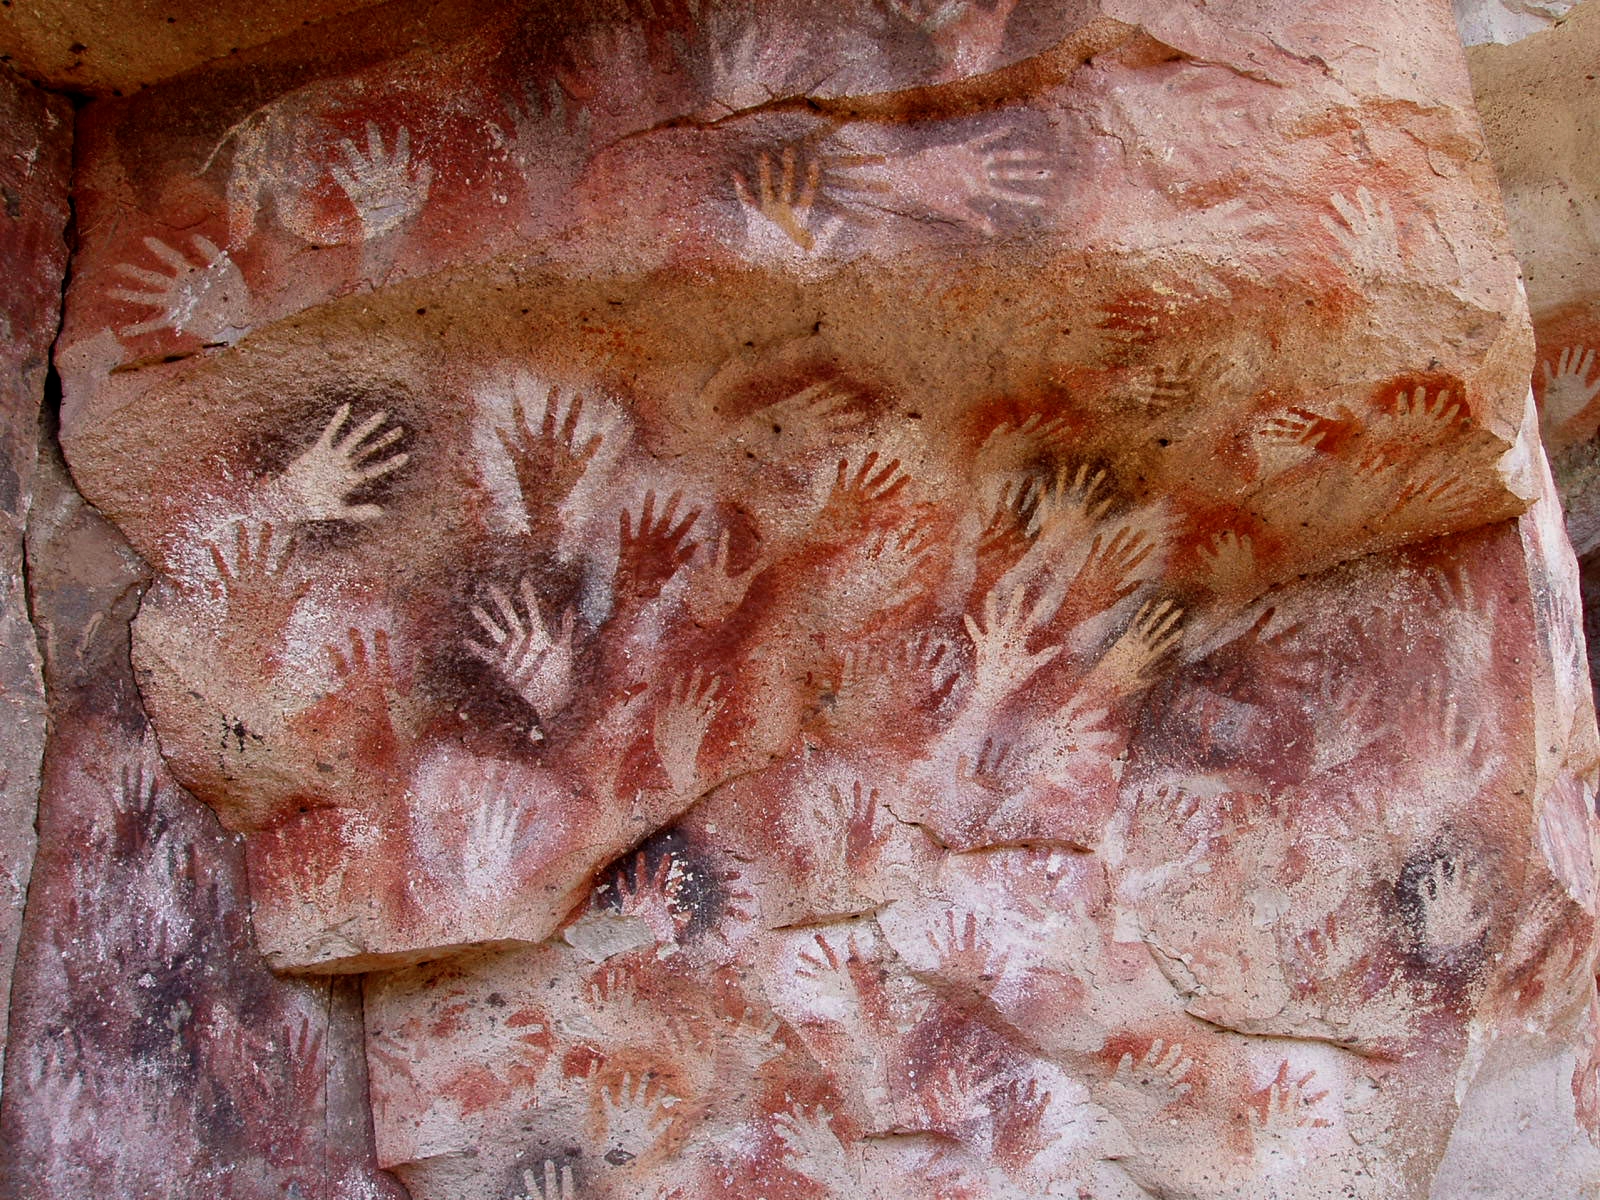 Photograph of Hands, at the Cave of the Hands. The cave painting appears as if the creators placed their hands on the wall and painted around them, leaving negative unpainted space where their hands once were.